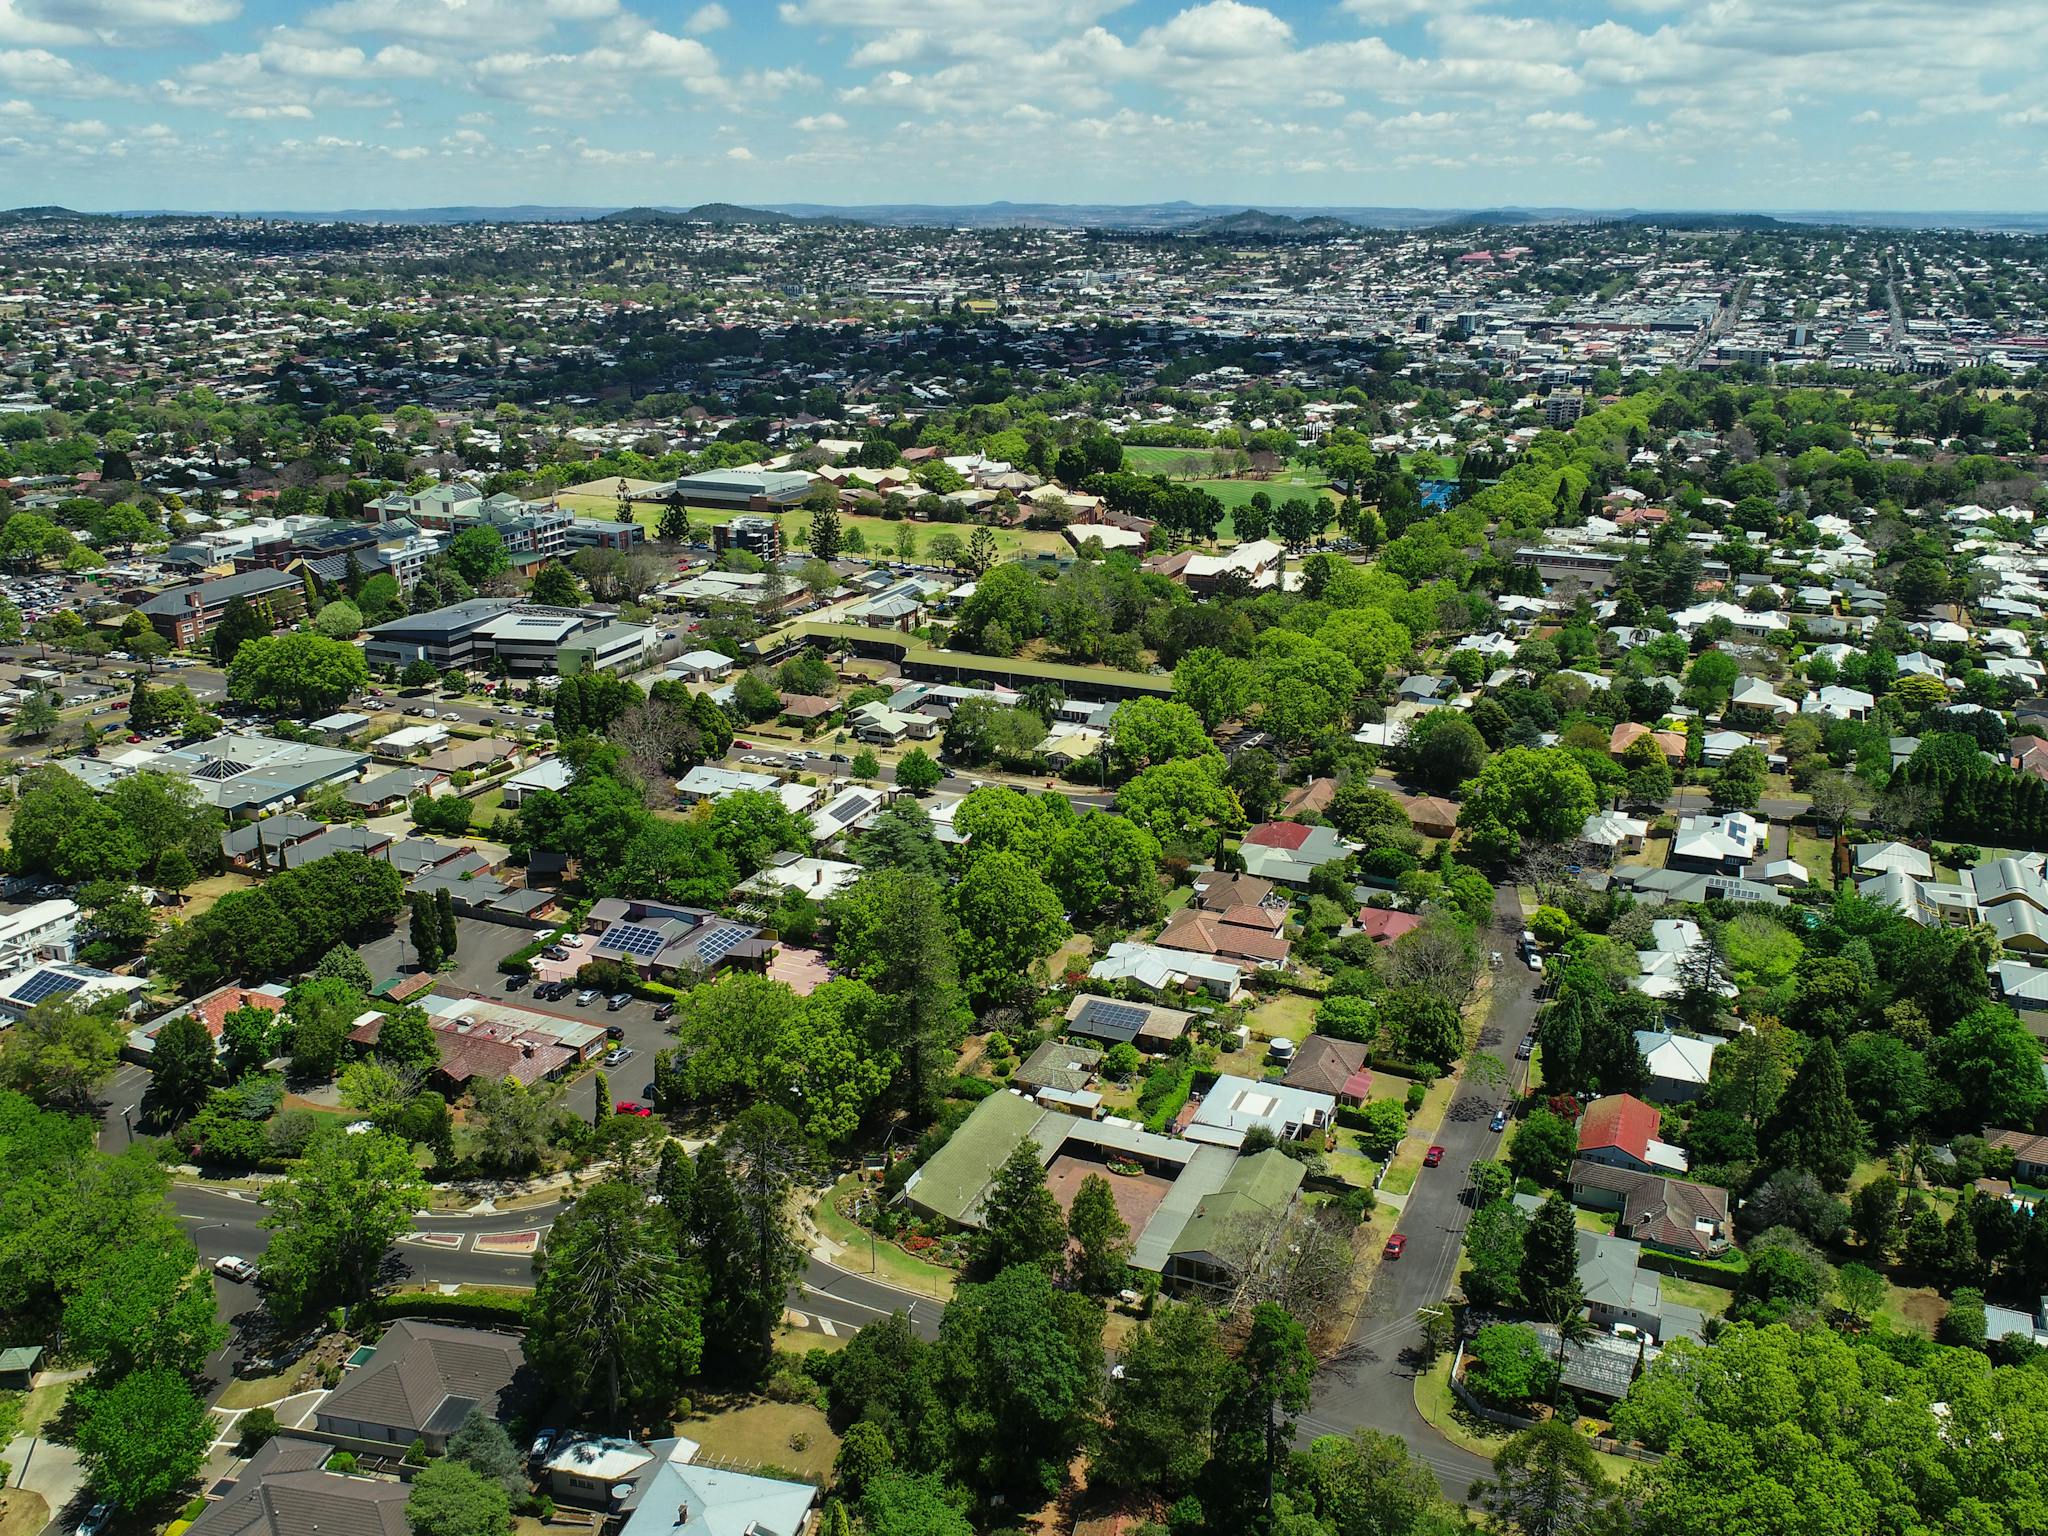 Aerial view of Motel looking East to St Vincent's Hospital, Toowoomba Grammar School & CBD